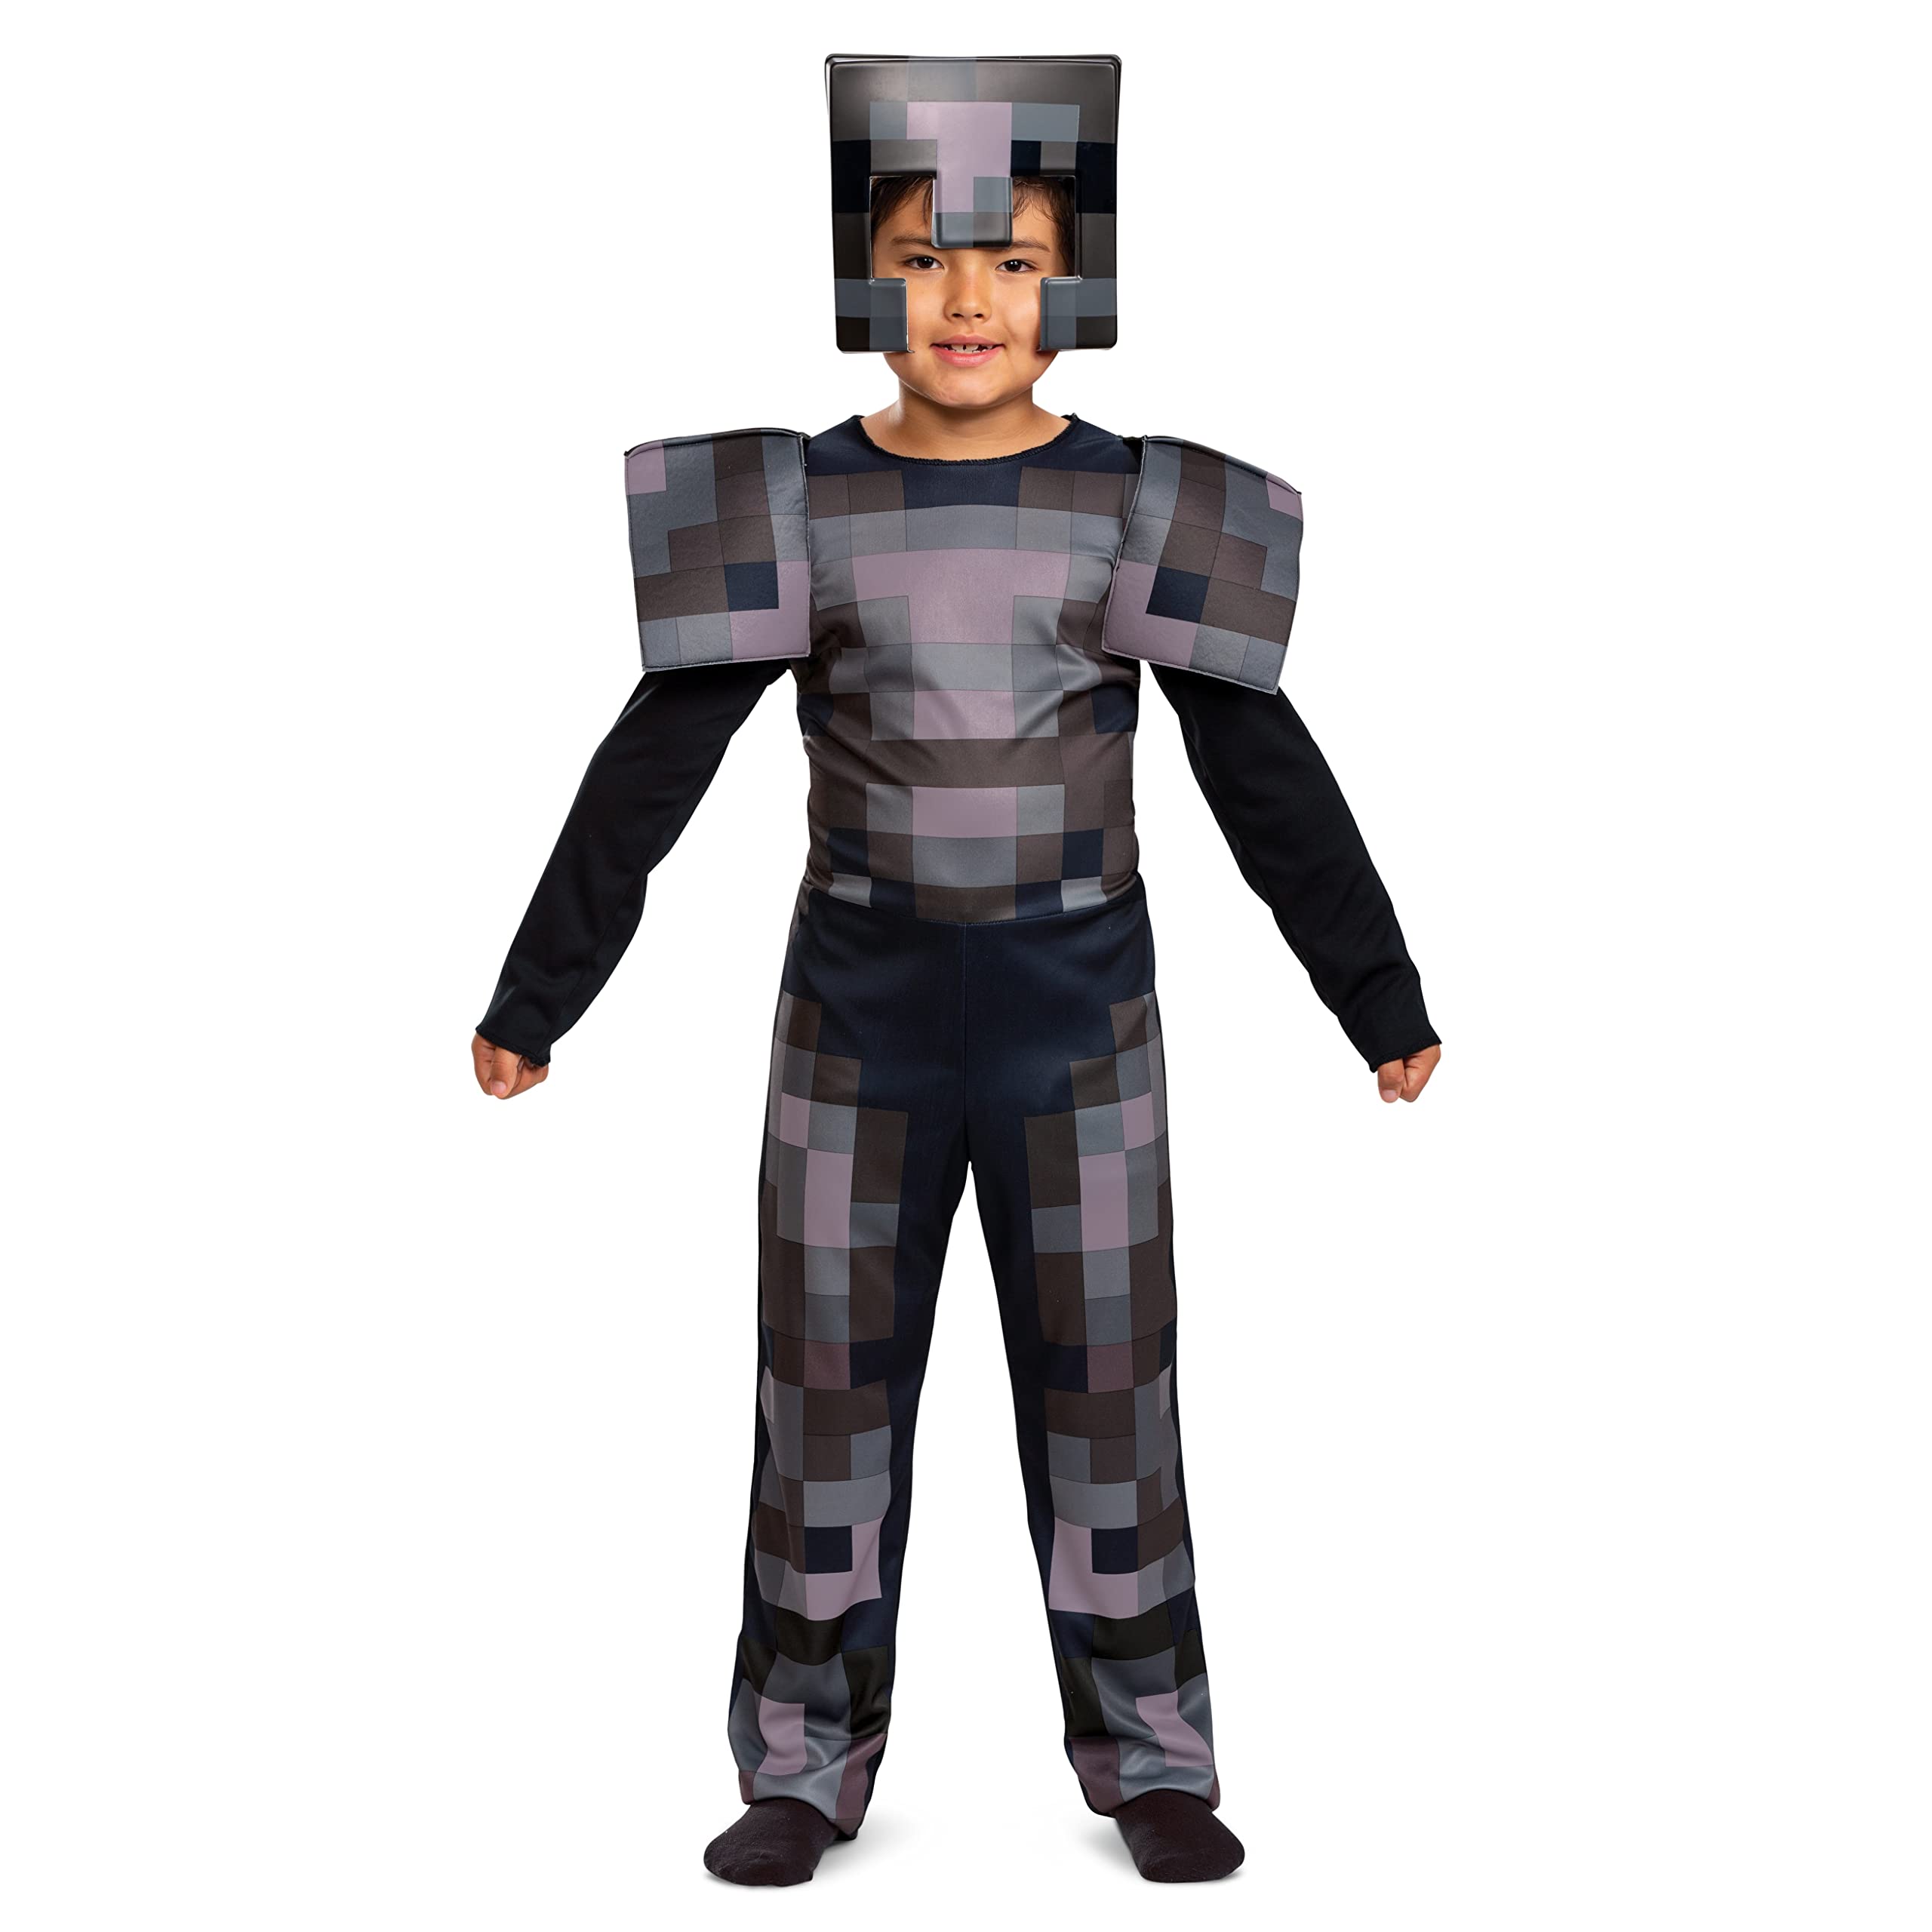 Minecraft Costume, Official Nether Armor Outfit for Kids Minecraft Costume